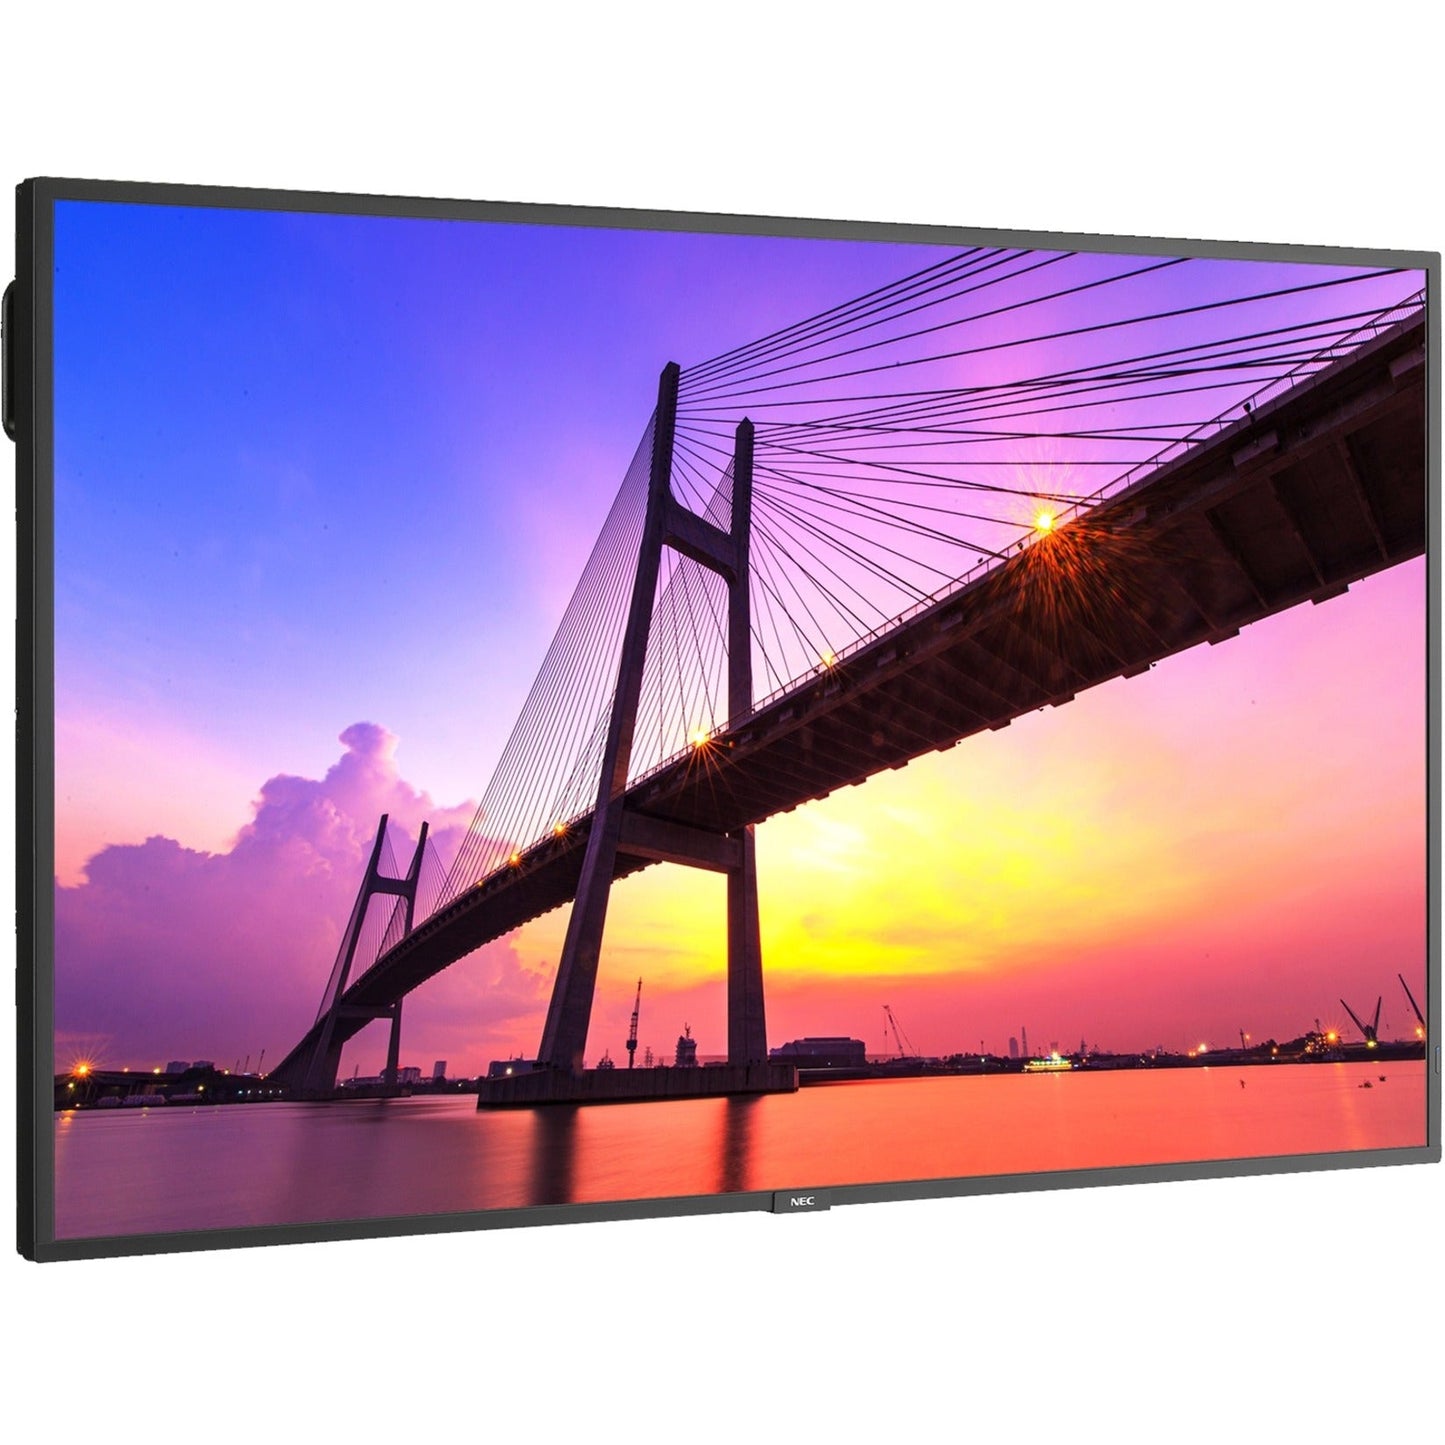 NEC Display 50" Ultra High Definition Commercial Display with Integrated ATSC/NTSC Tuner